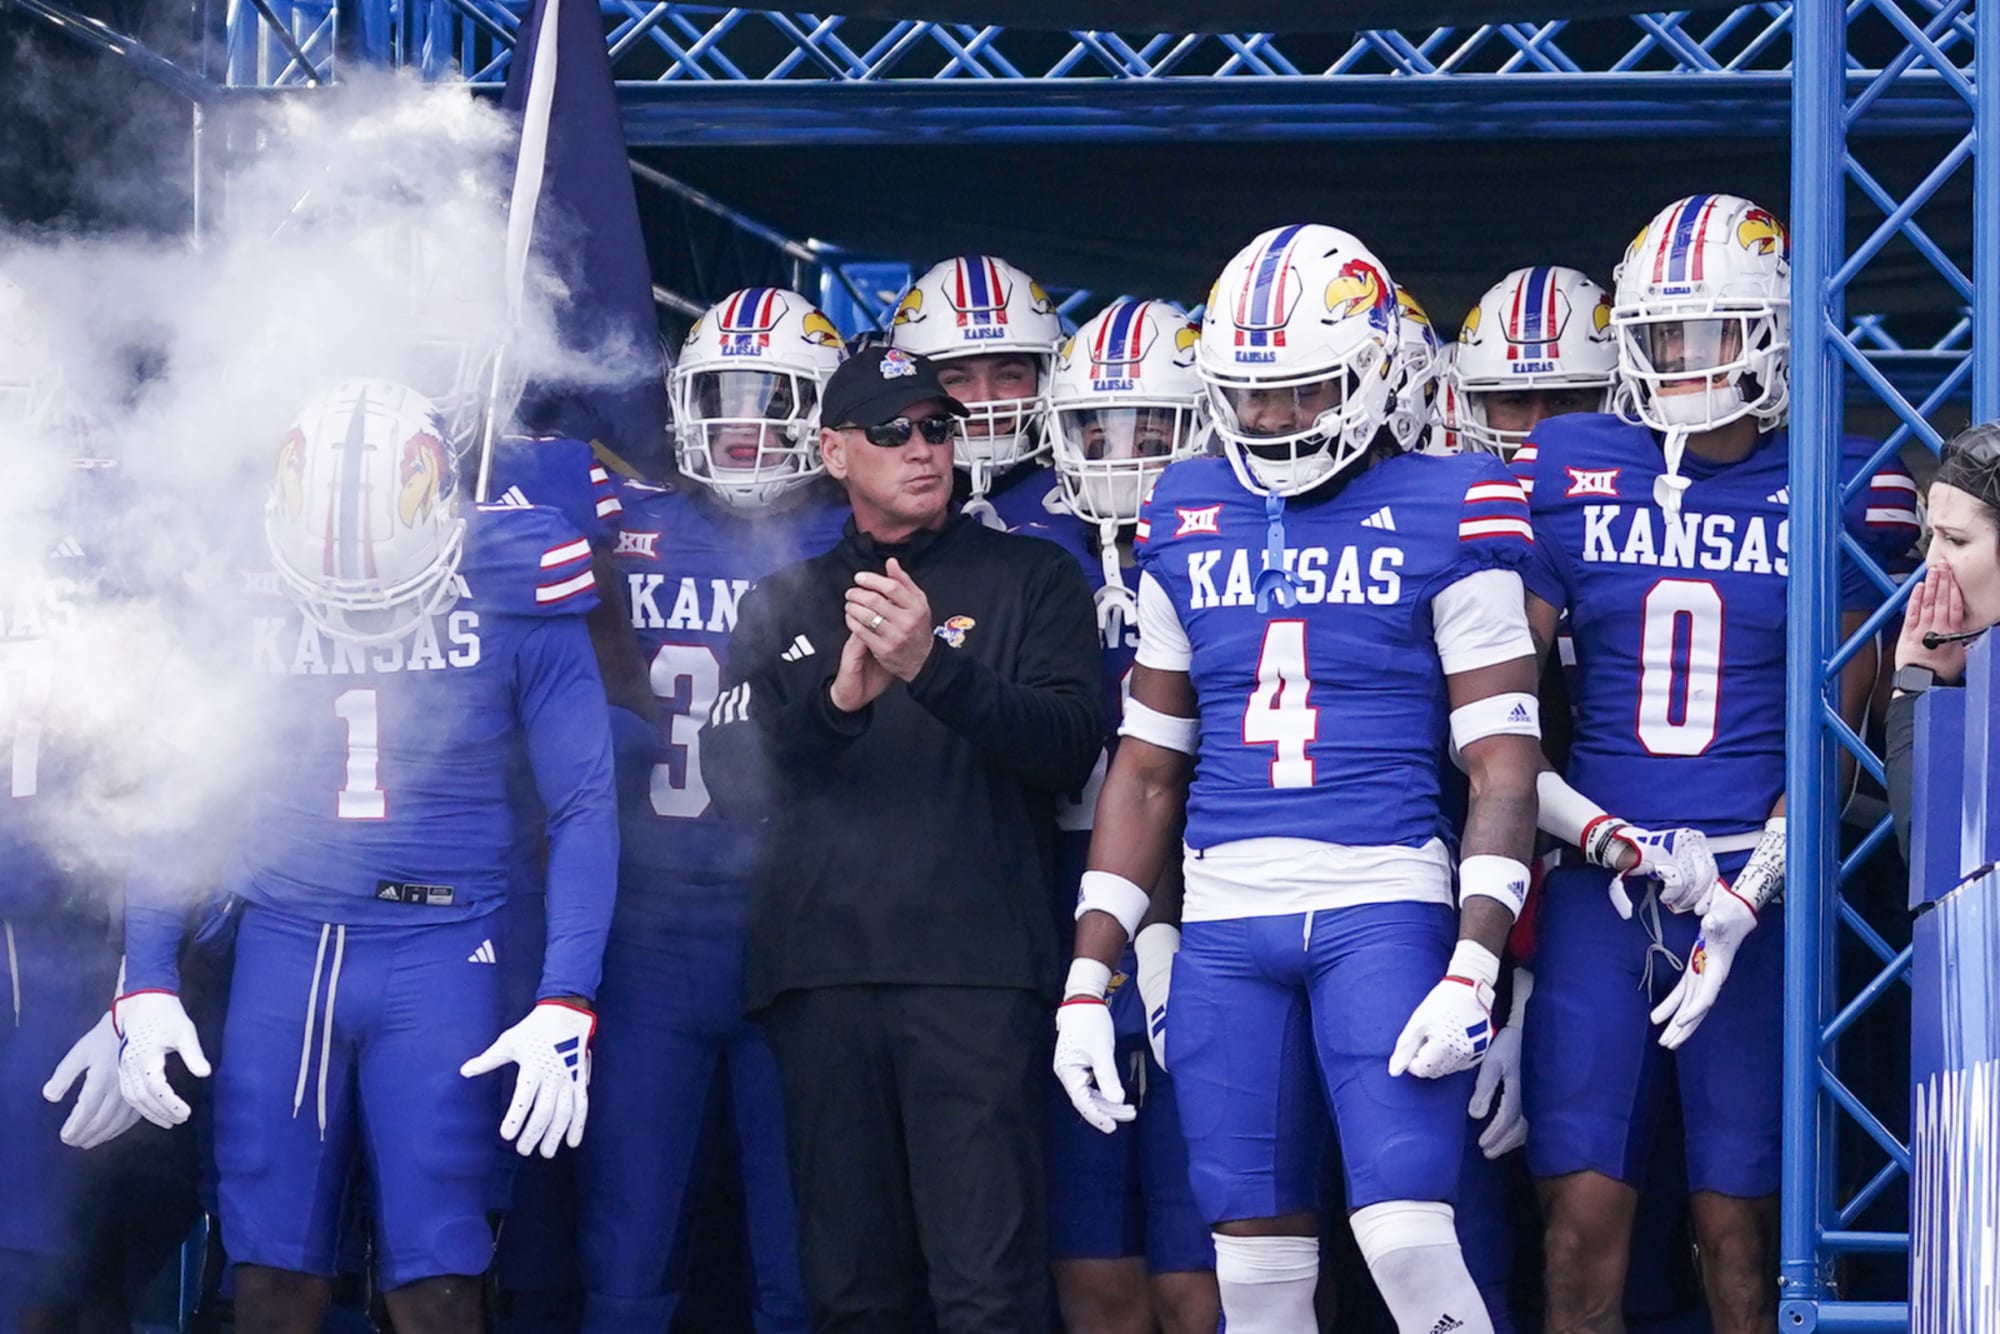 Texas Tech football: Why Kansas is a tough matchup for the Red Raiders